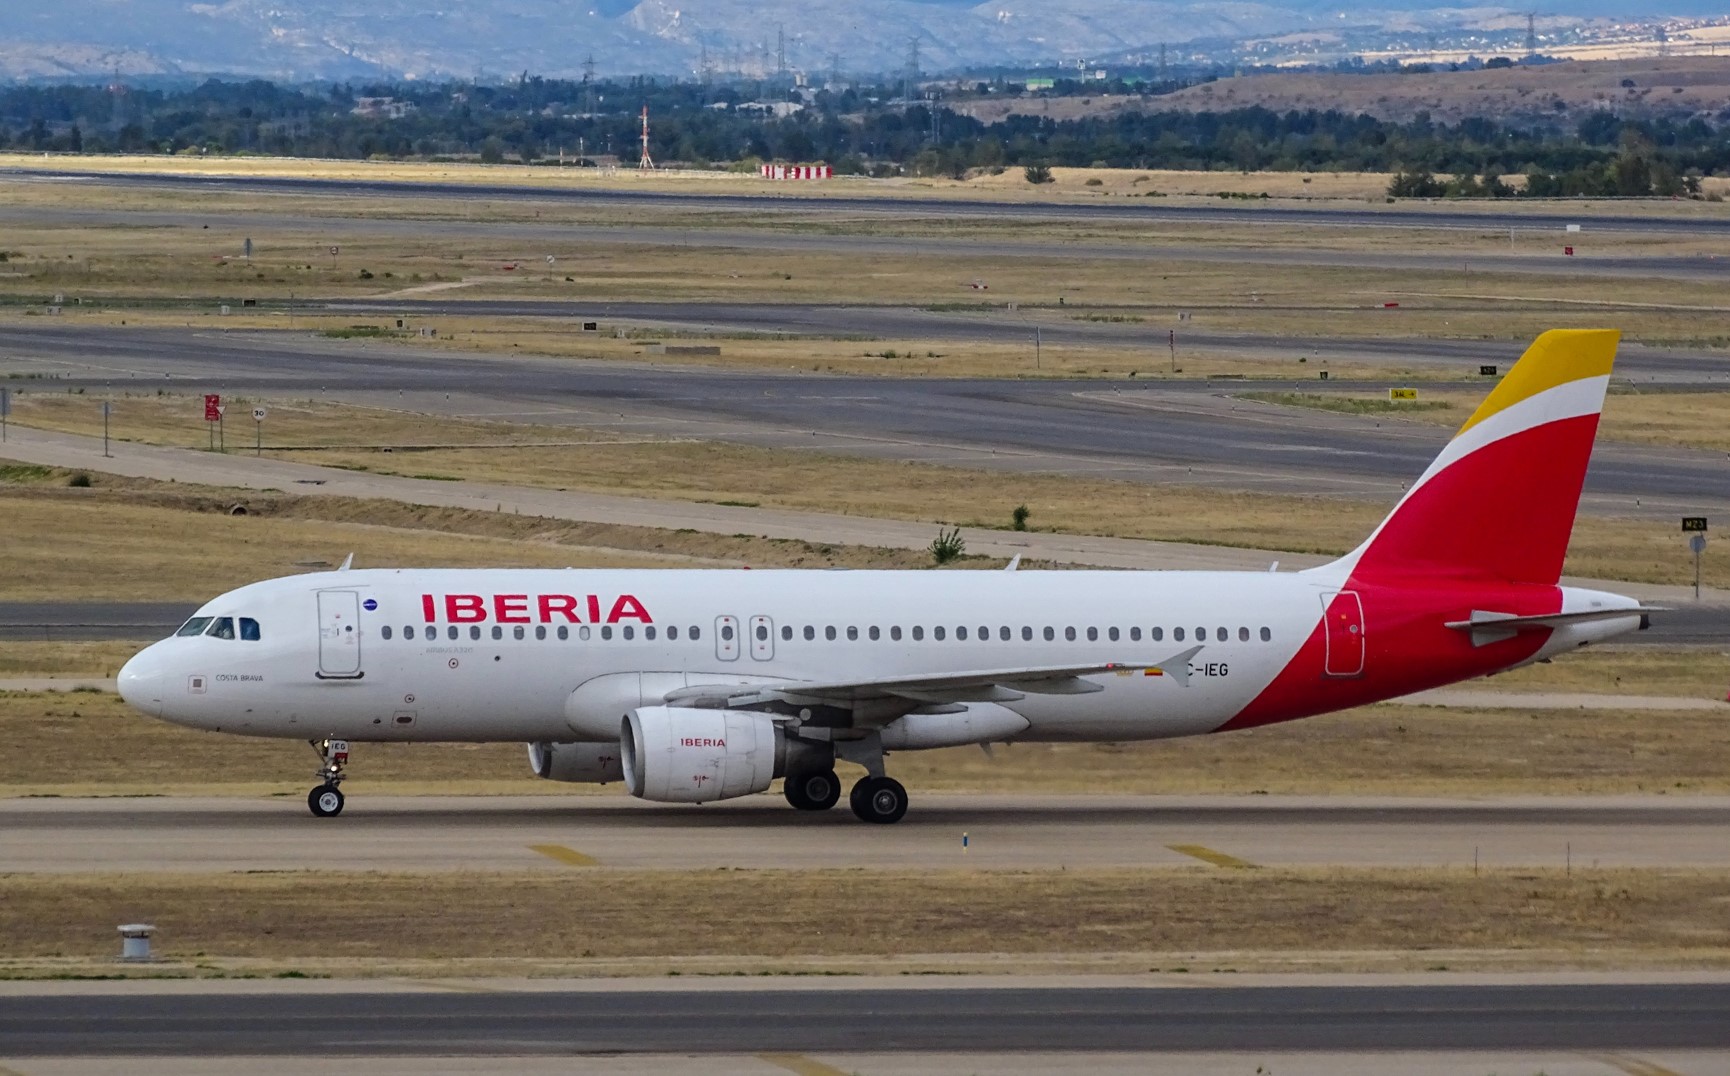 Iberia Airline plane landed at the airport